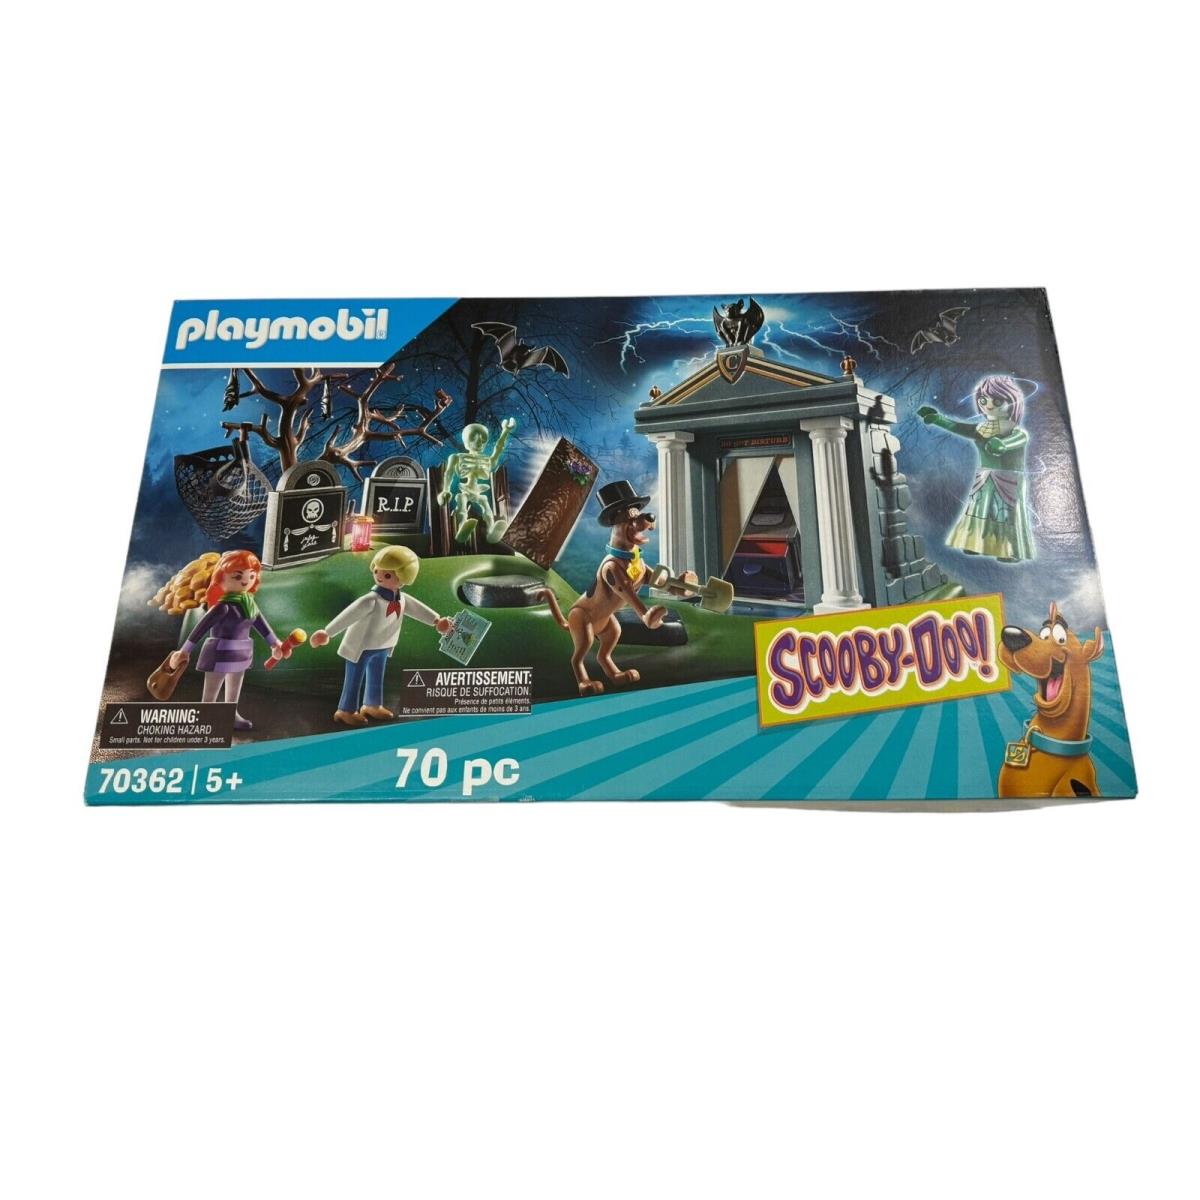 Playmobil Scooby Doo Adventure on The Cemetery 70362 Kids TV Show Playset